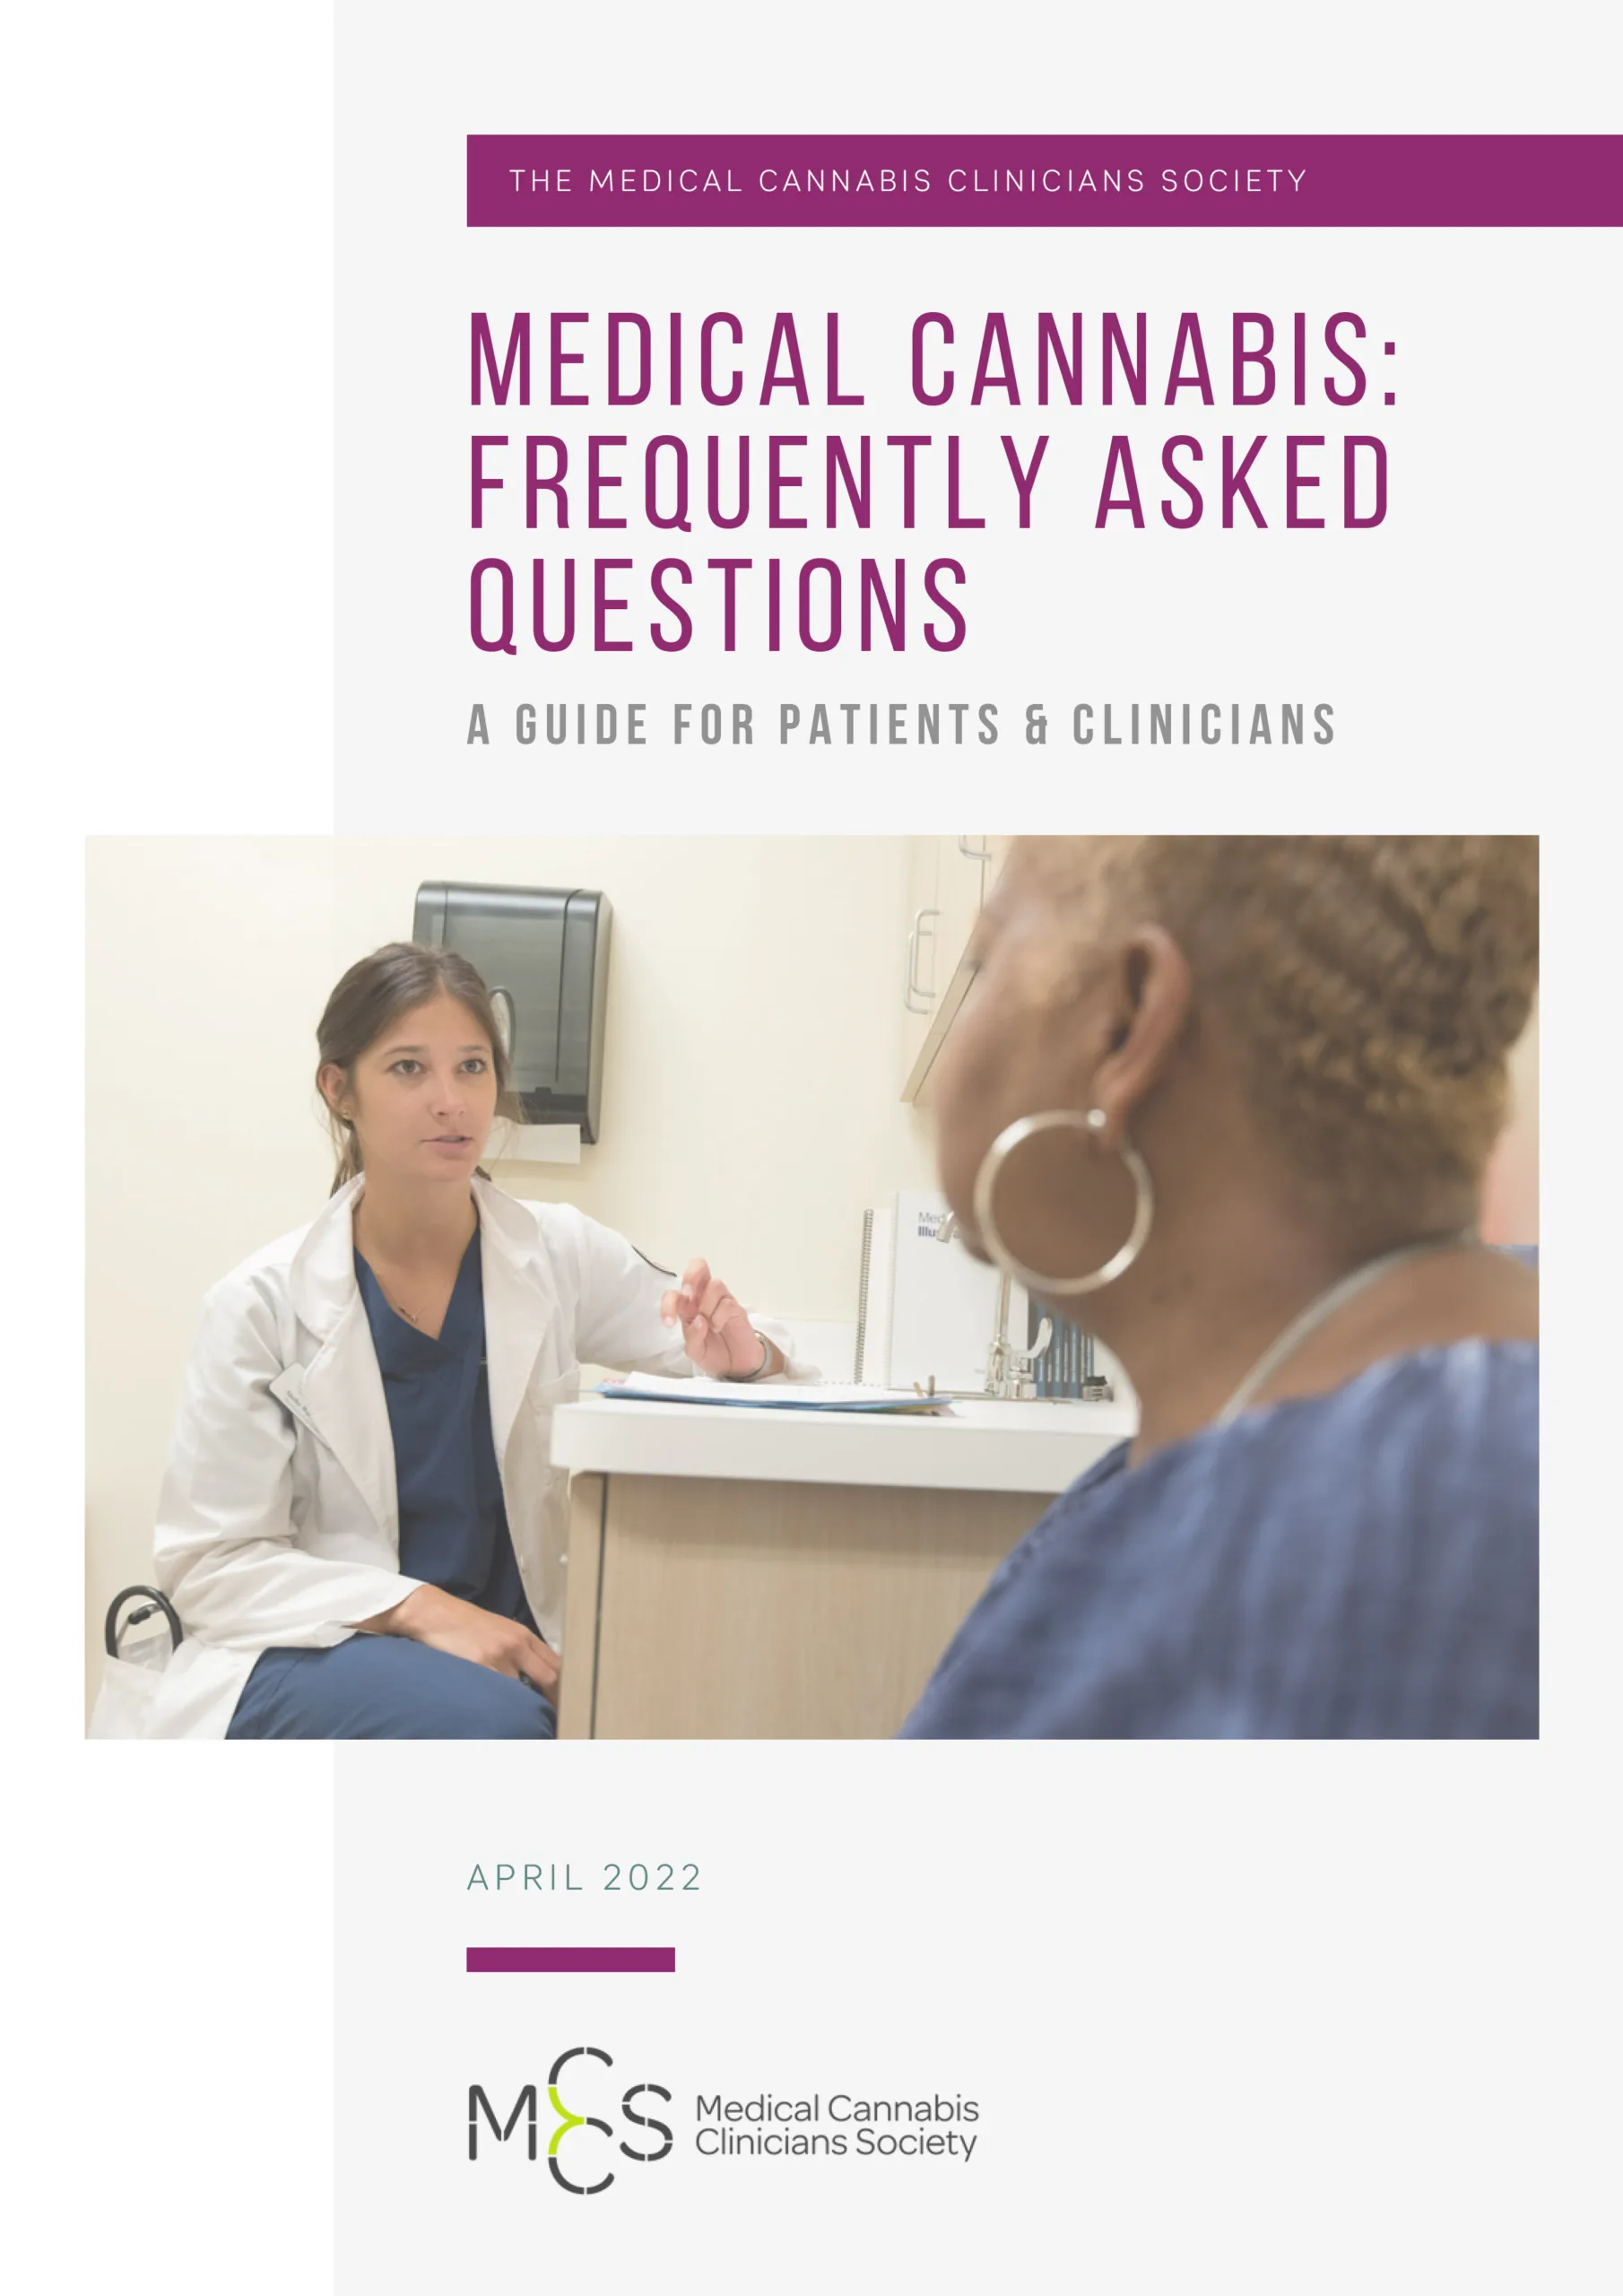 The cover image for an article; showing the article name 'Medical Cannabis: FAQs' with a photo of a doctor speaking to a patient.